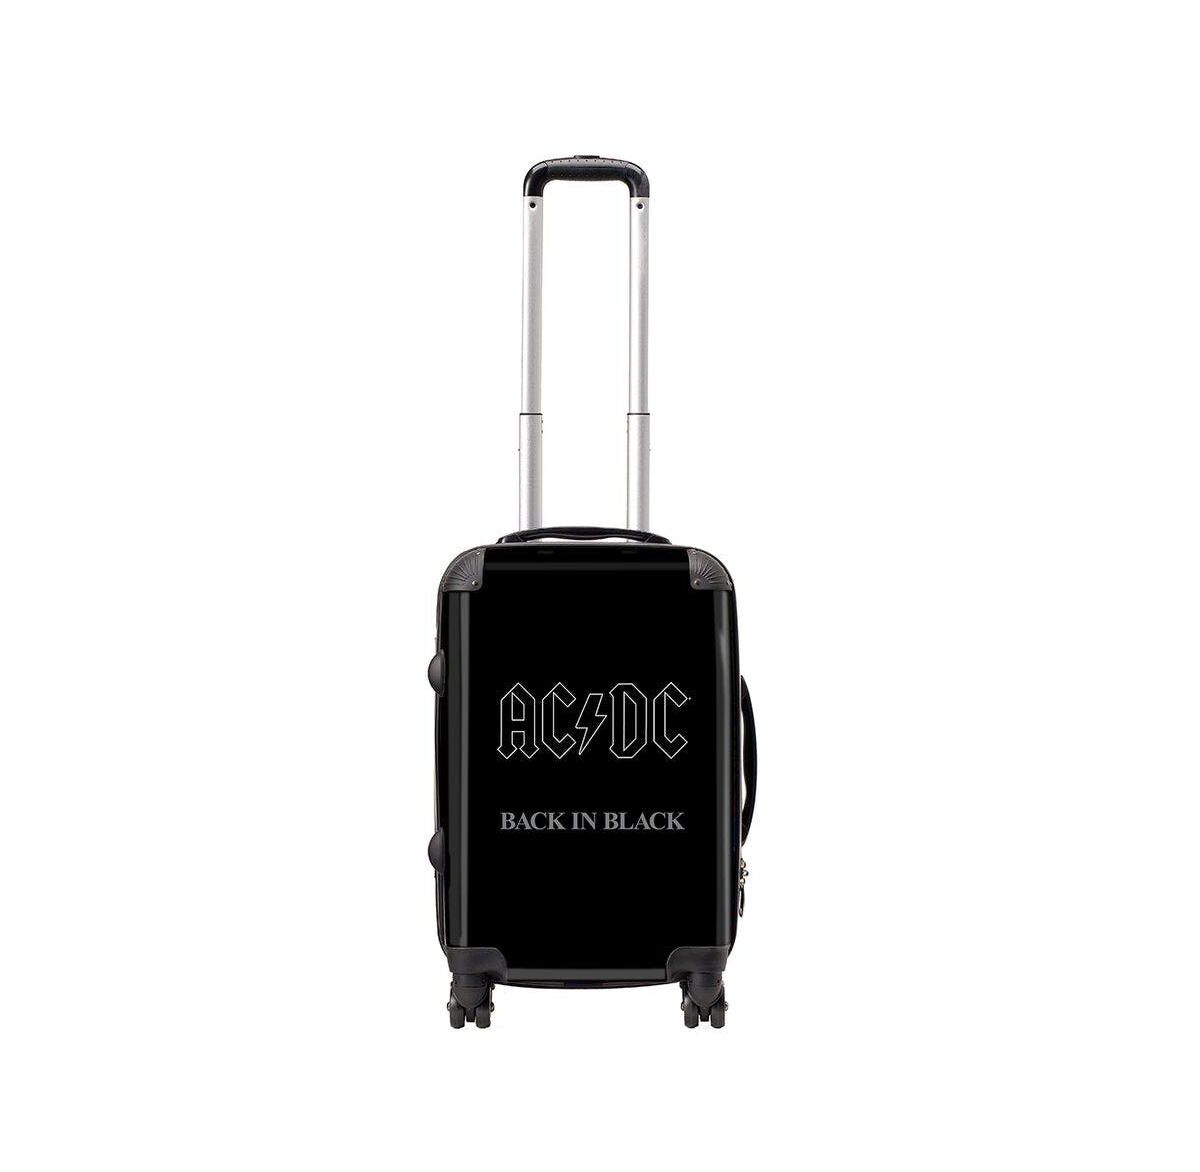 Rocksax Ac/Dc Tour Series Luggage - Back In Black - Small - Carry On - Multi-colored